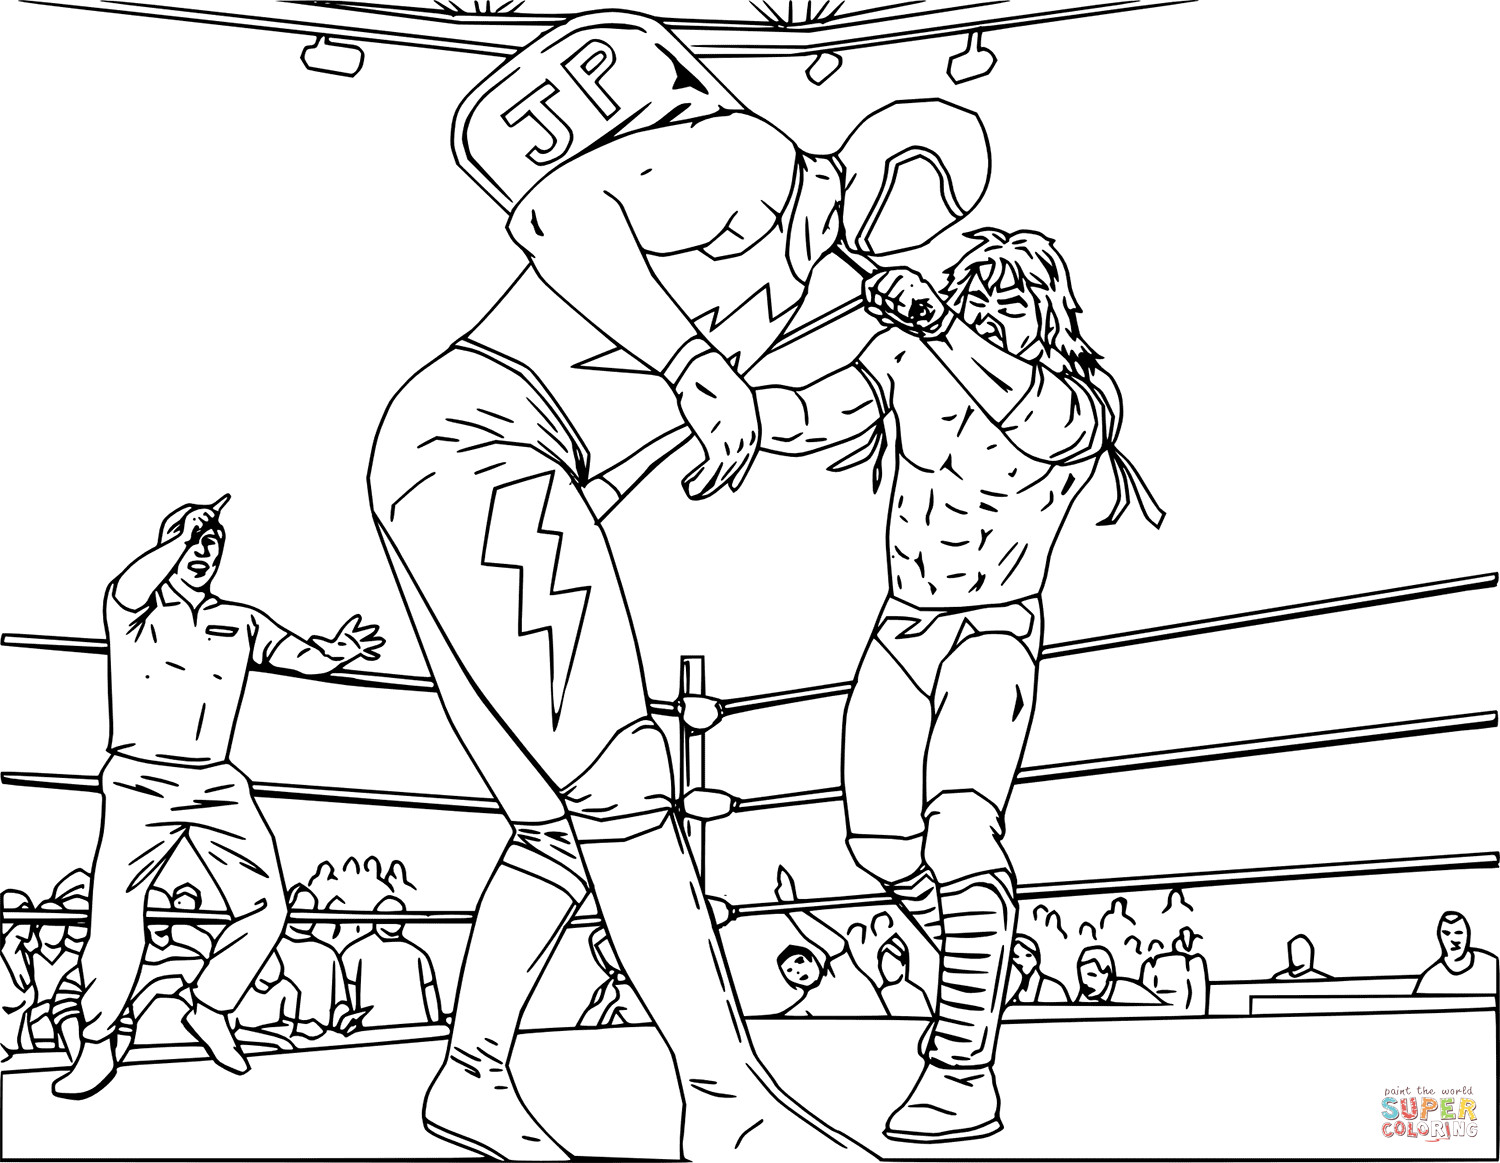 Wrestling Coloring Pages
 WWE Wrestling Fight coloring page